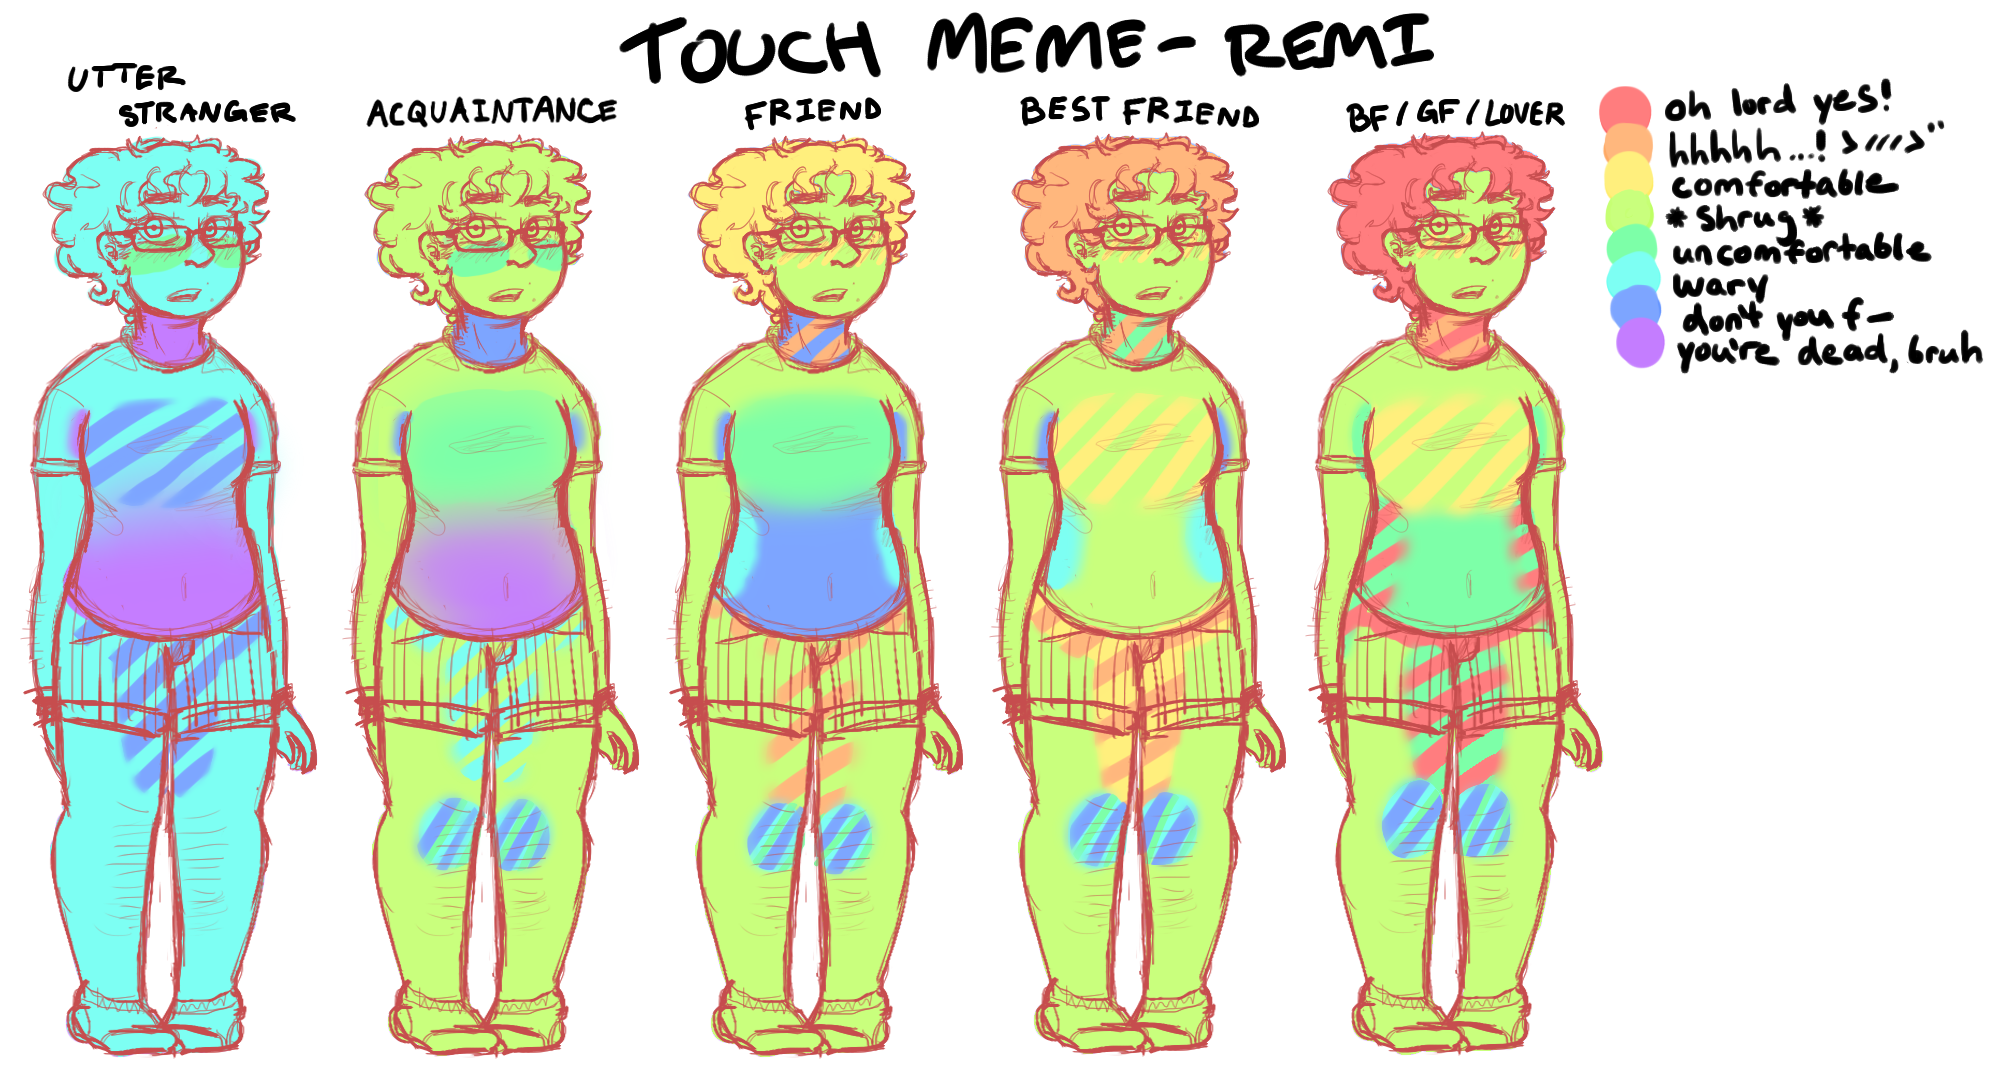 remi-touch-meme-by-phishfry-on-deviantart